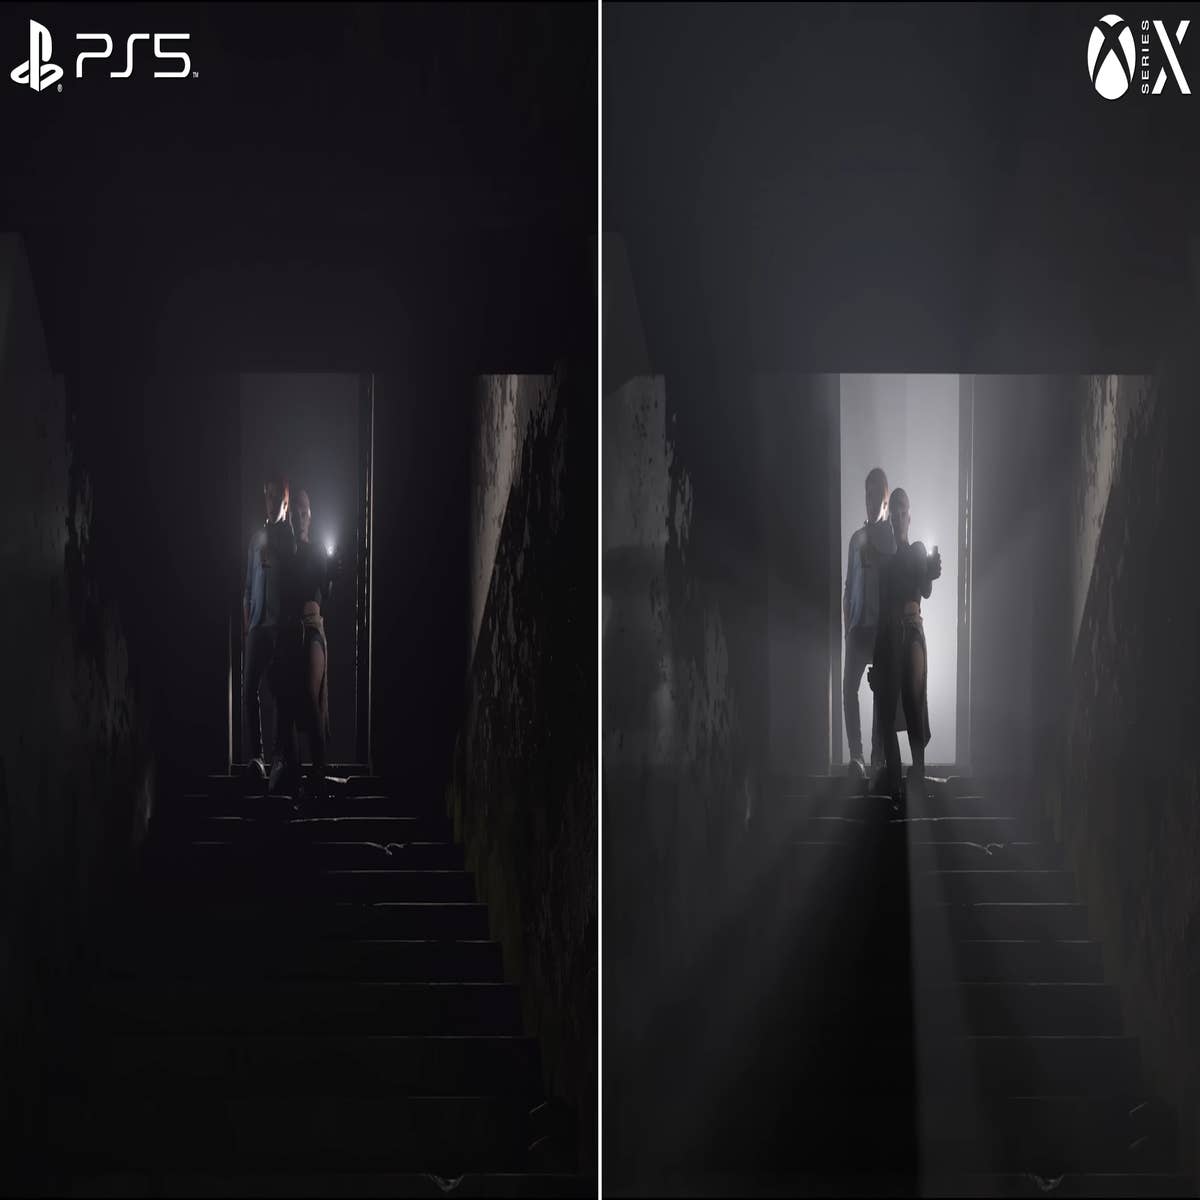 The Quarry is a motion capture showcase on PS5 and Xbox Series X